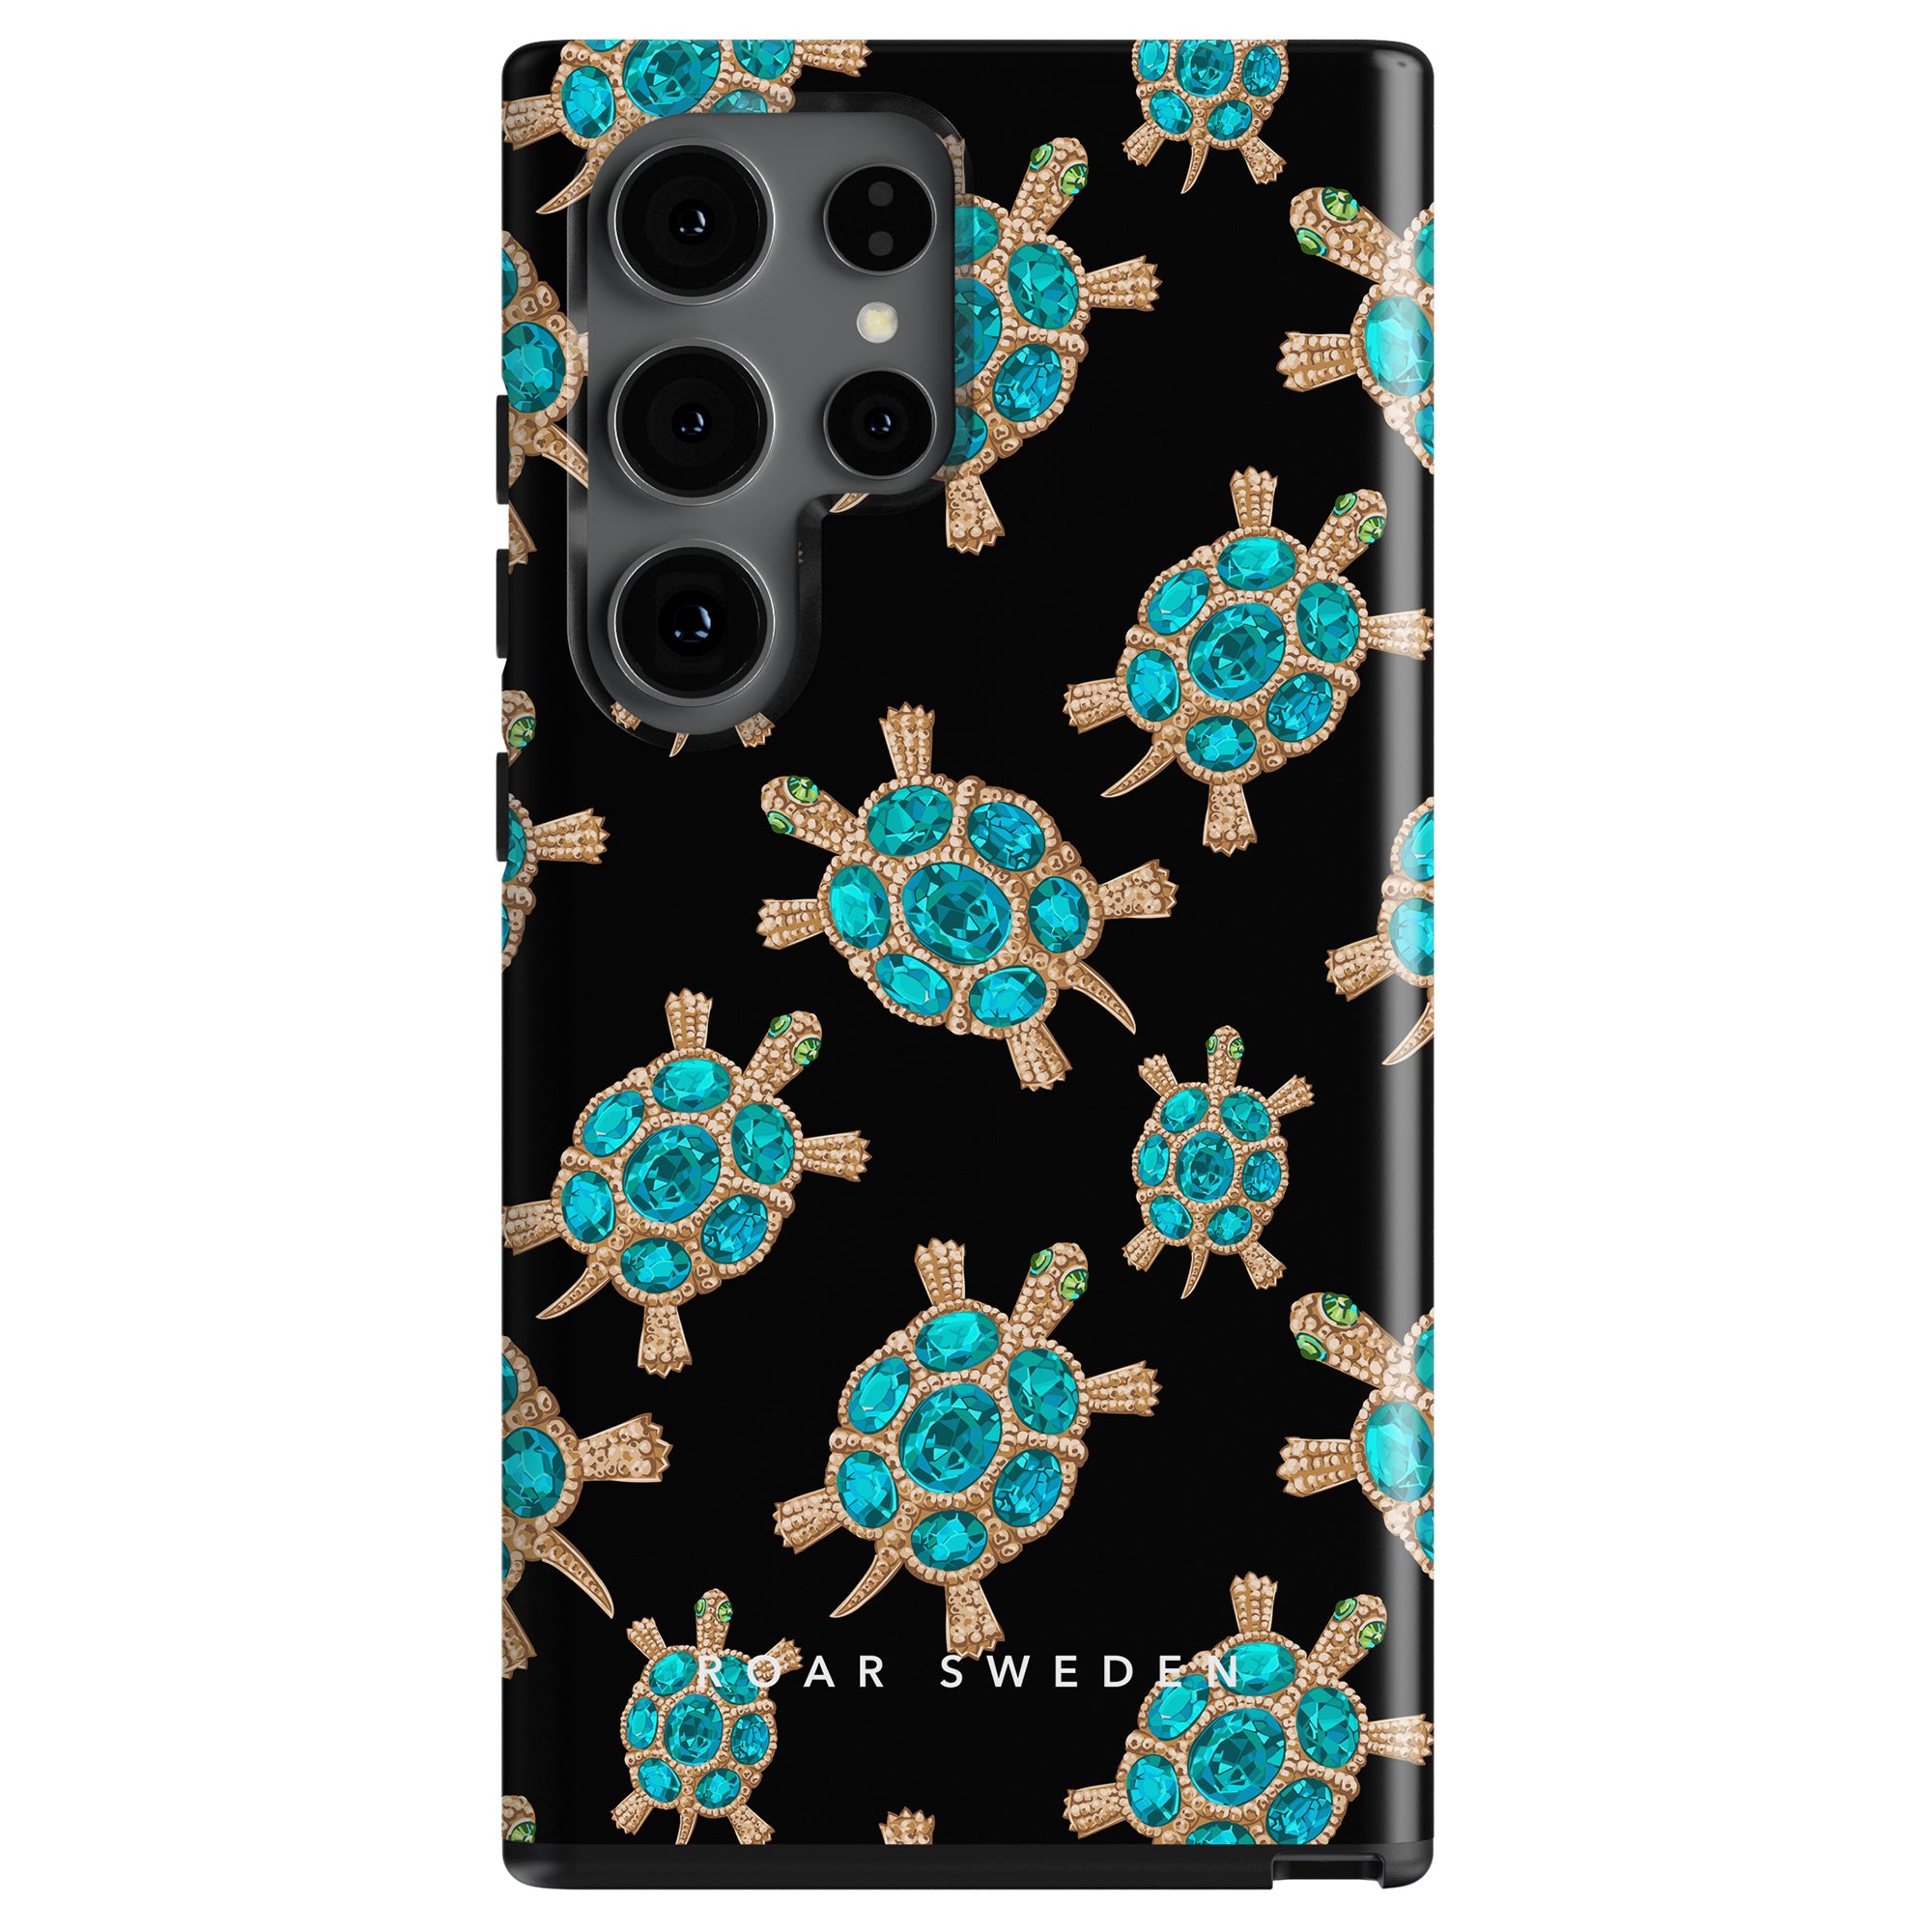 Black smartphone case with Diamond Turtle pattern from the Ocean Collection and brand logo.